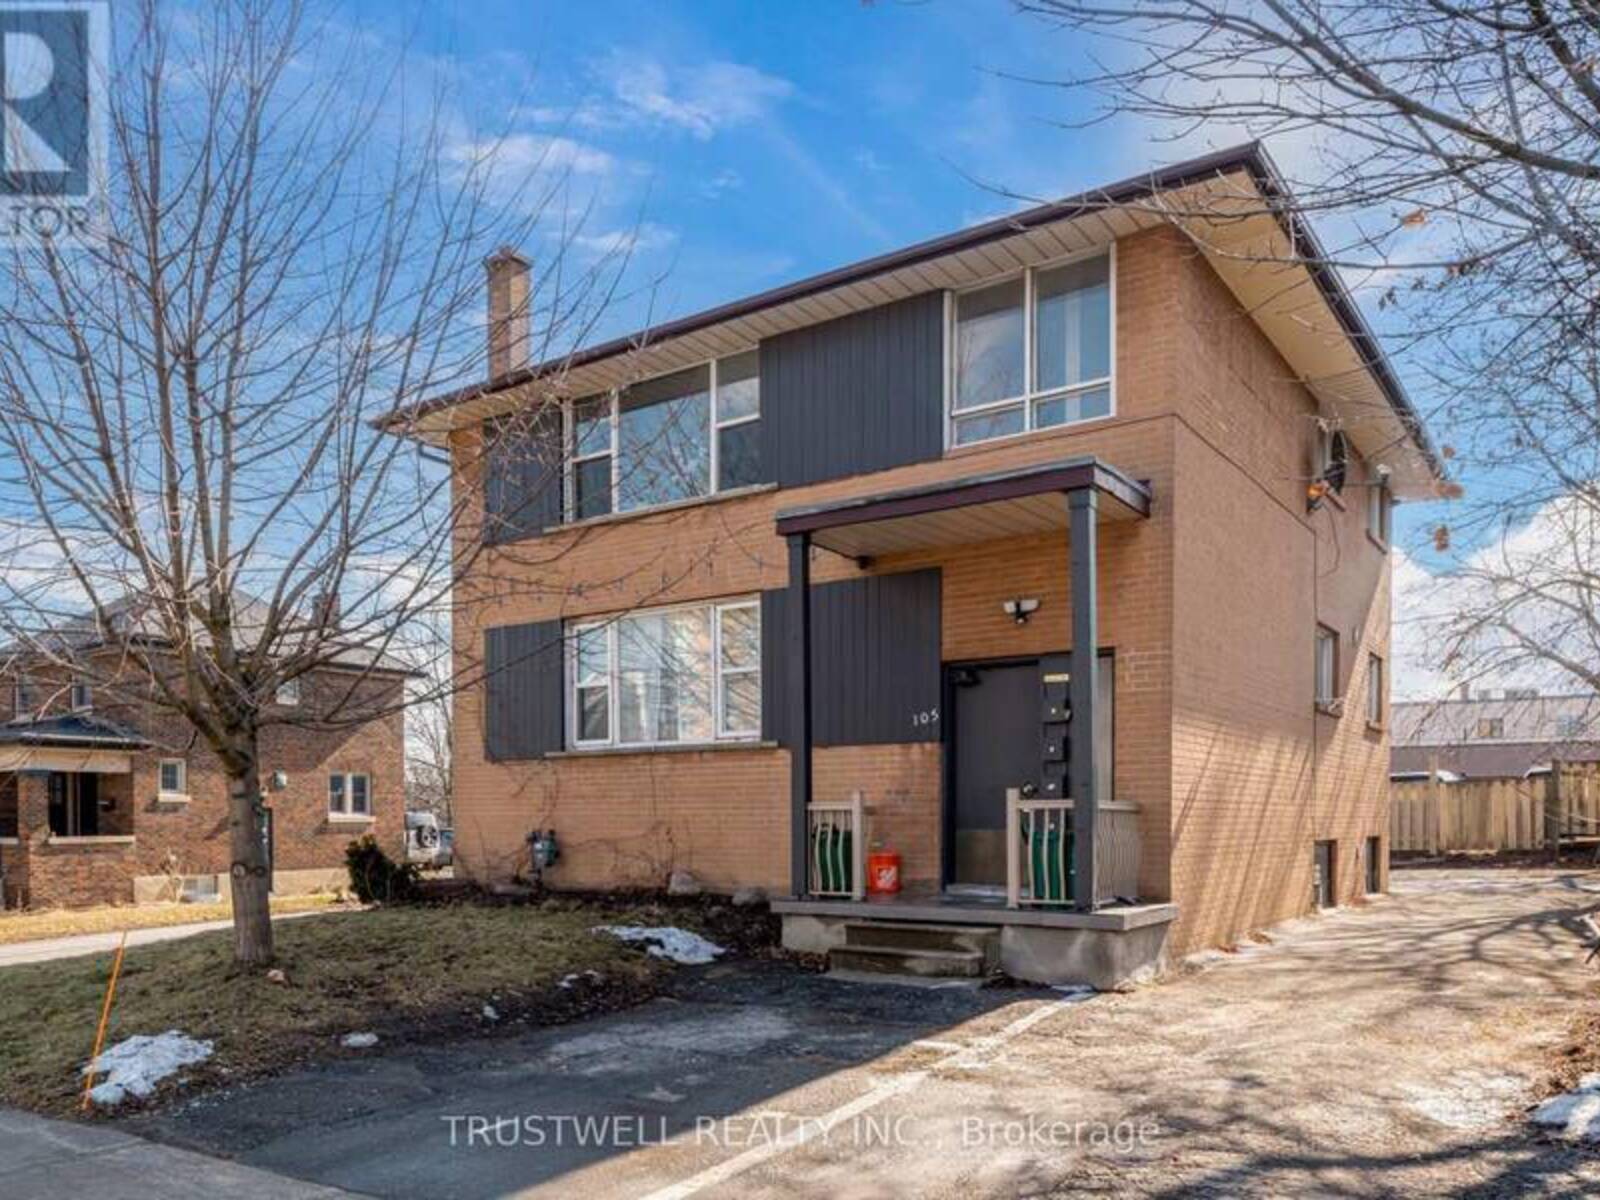 105 MARY ST E, Whitby, Ontario L1N 2P3